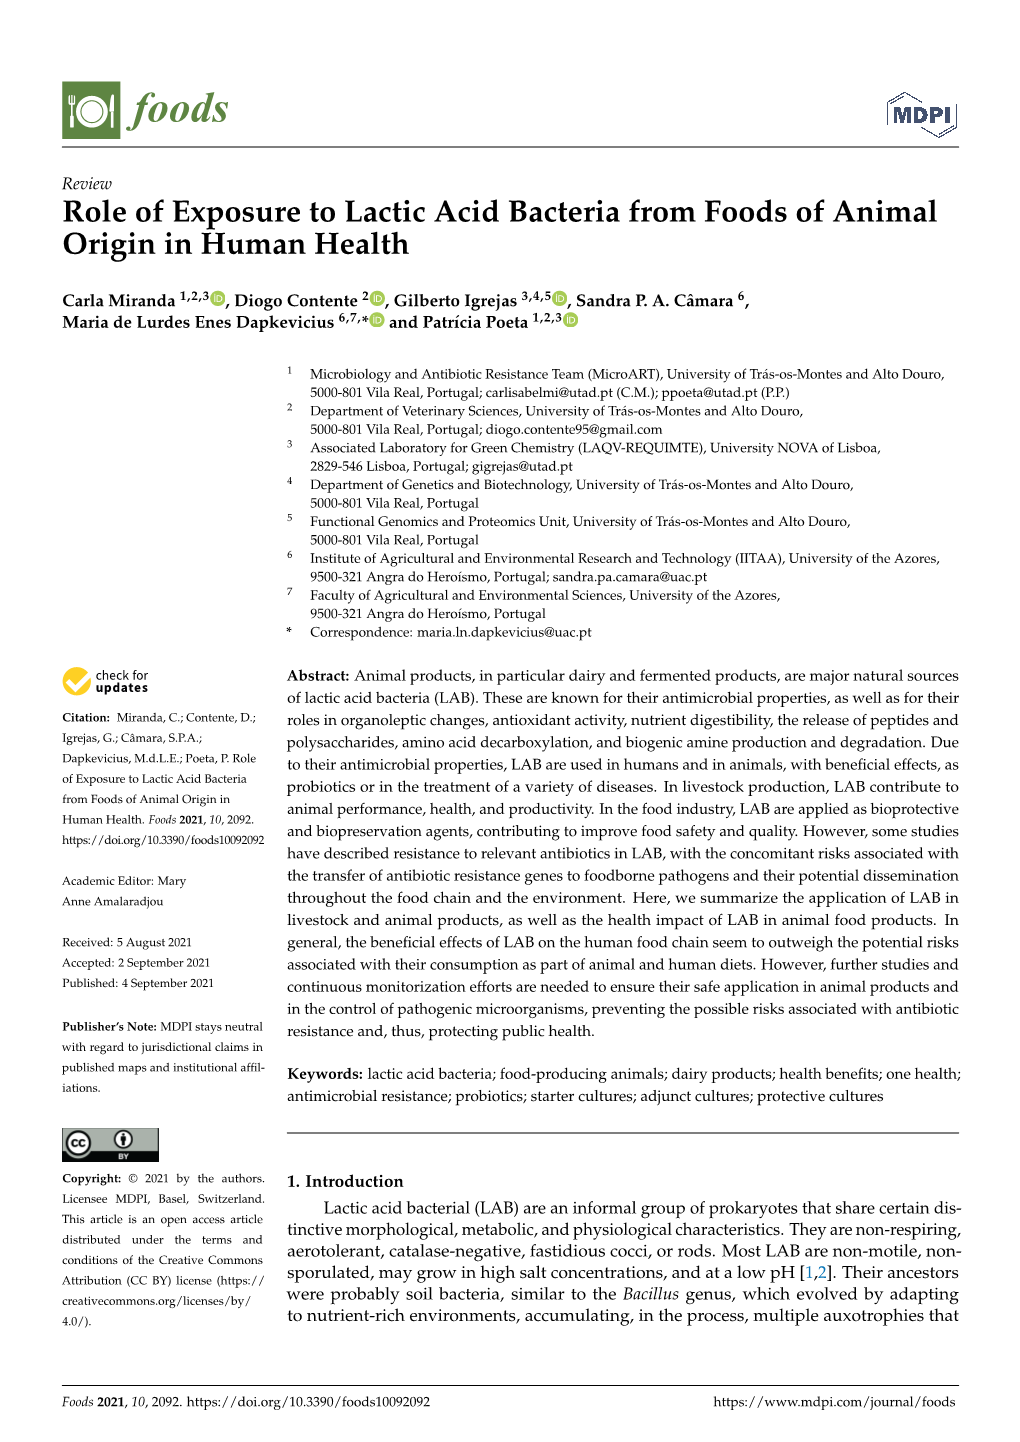 Role of Exposure to Lactic Acid Bacteria from Foods of Animal Origin in Human Health